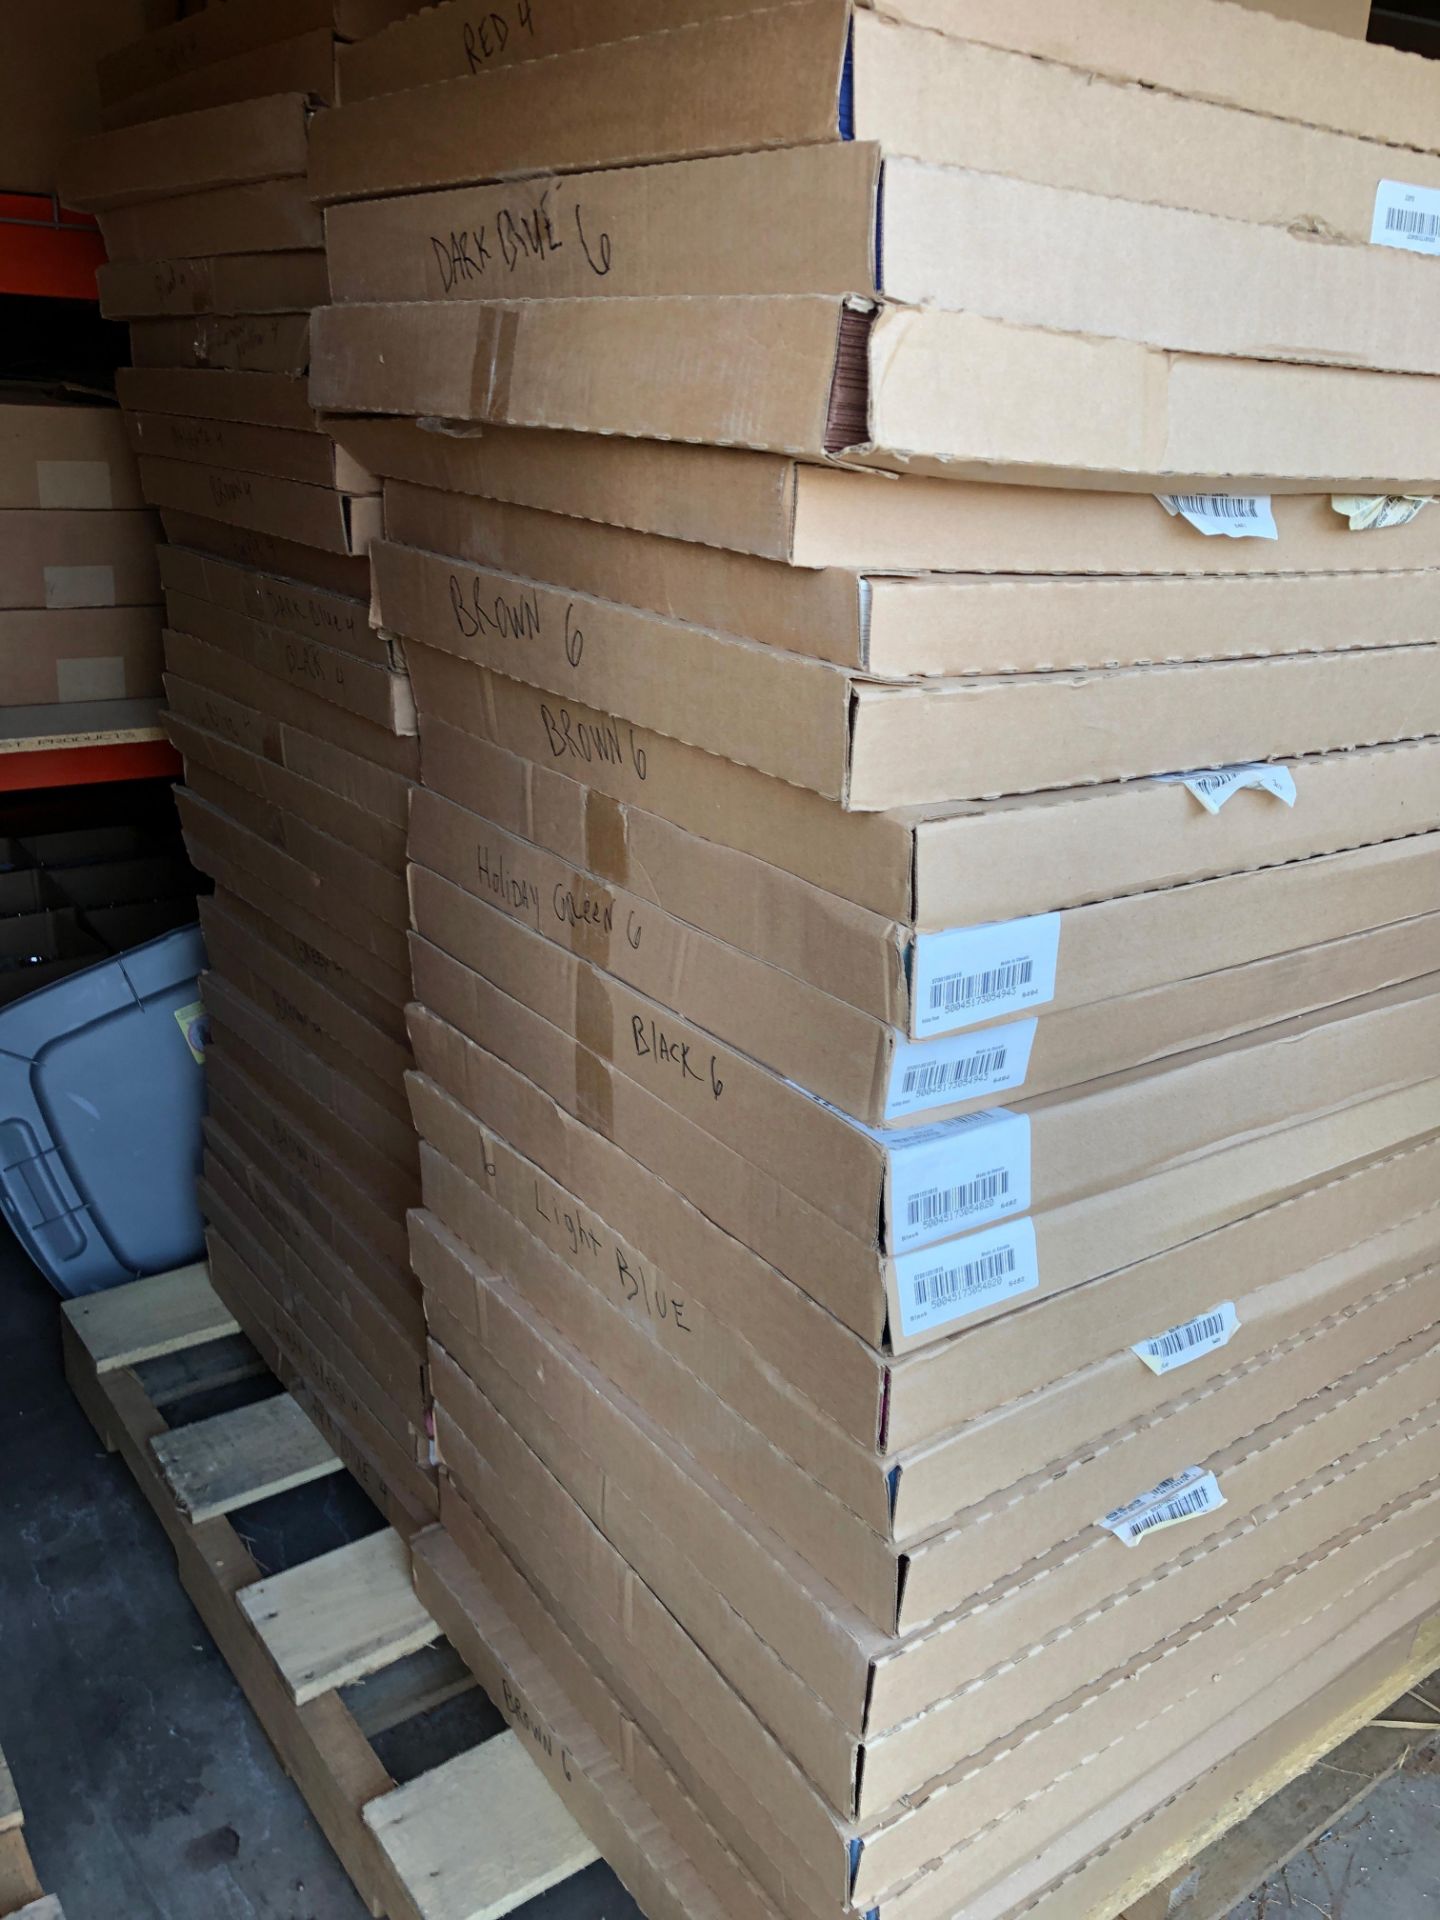 2 Pallets of Pacon Railroad Board Construction Paper, 93 Packs Retail avg. $49-75 EA ($4,650 Total) - Image 3 of 3